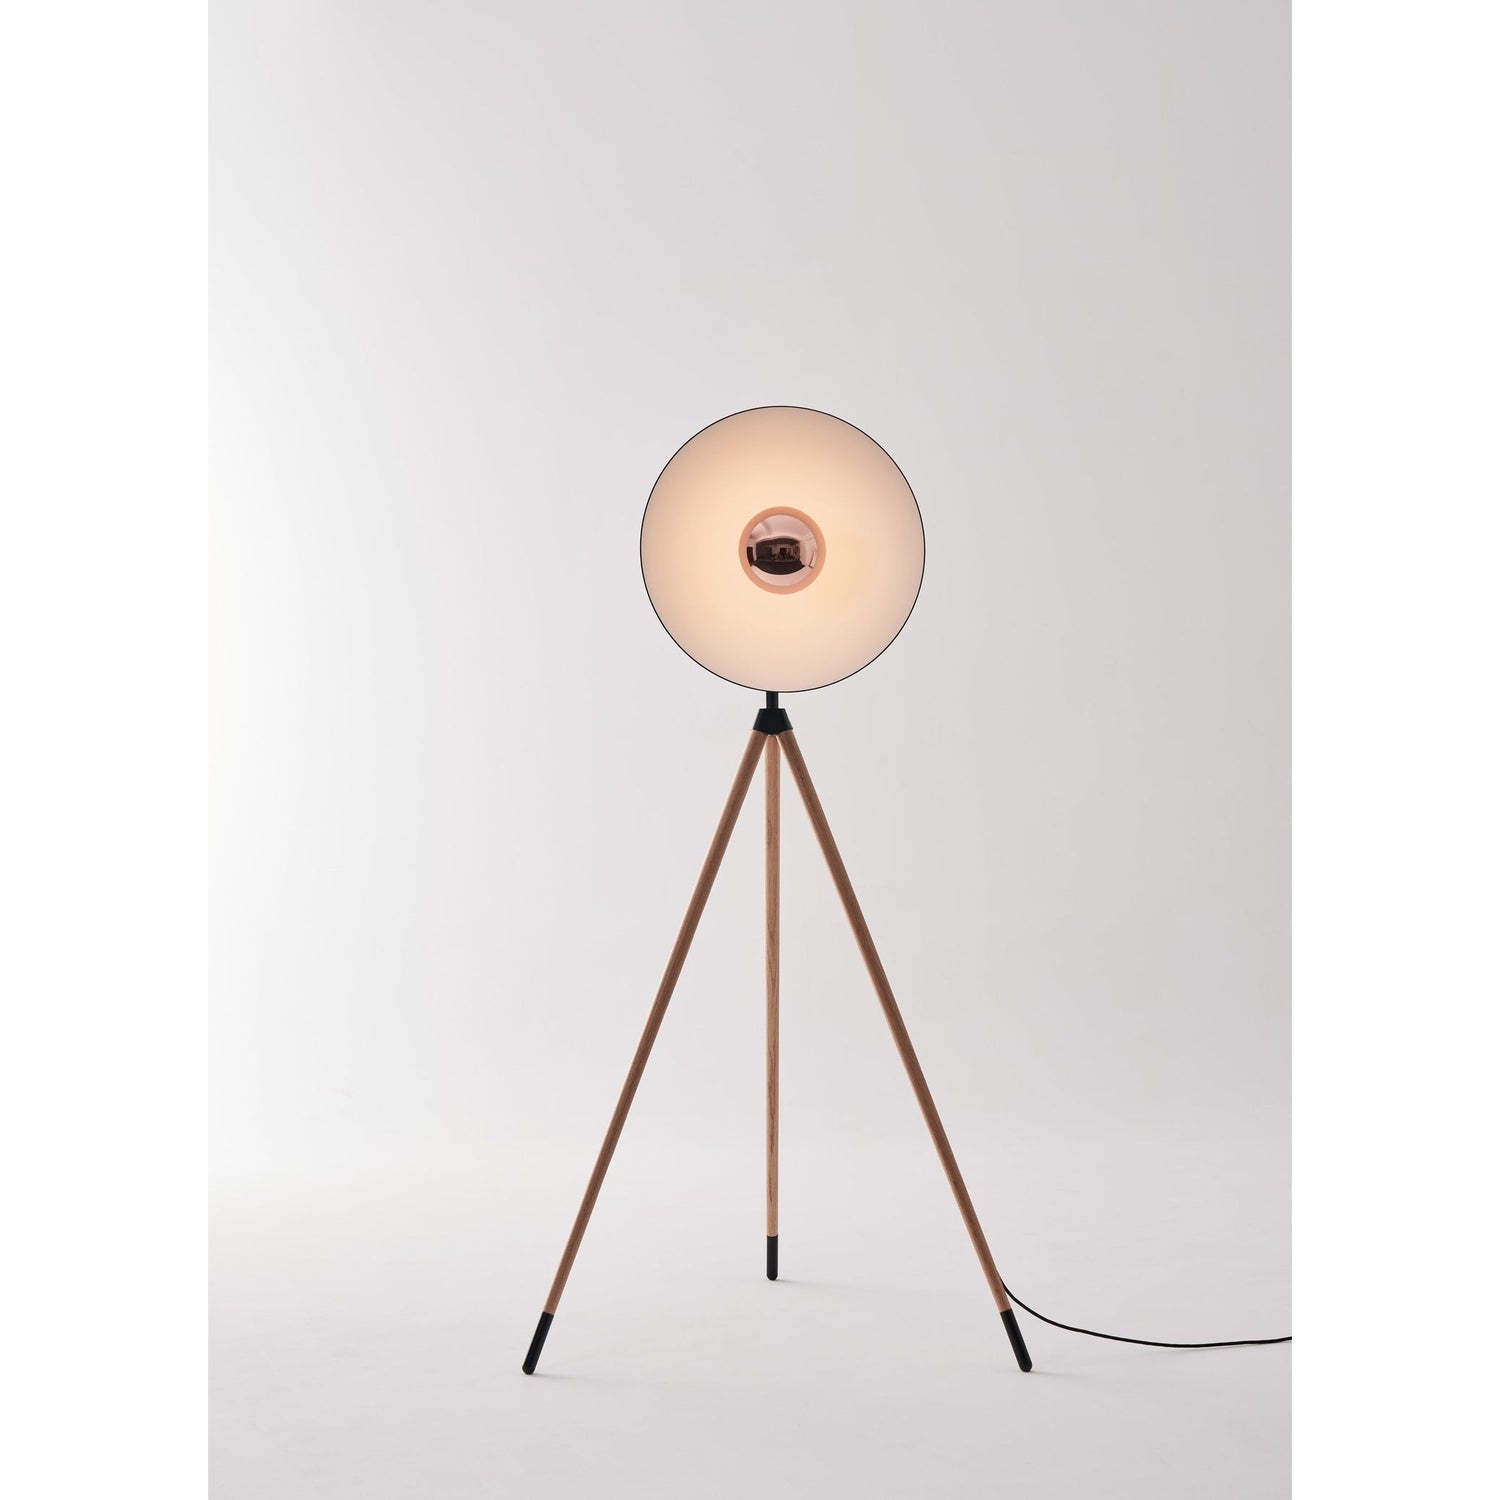 Apollo Mega Floor Lamp-Seed Design-SEED-SLD-3655MFTE-BCH-Floor LampsBlack/Cooper + Beech Wood-1-France and Son